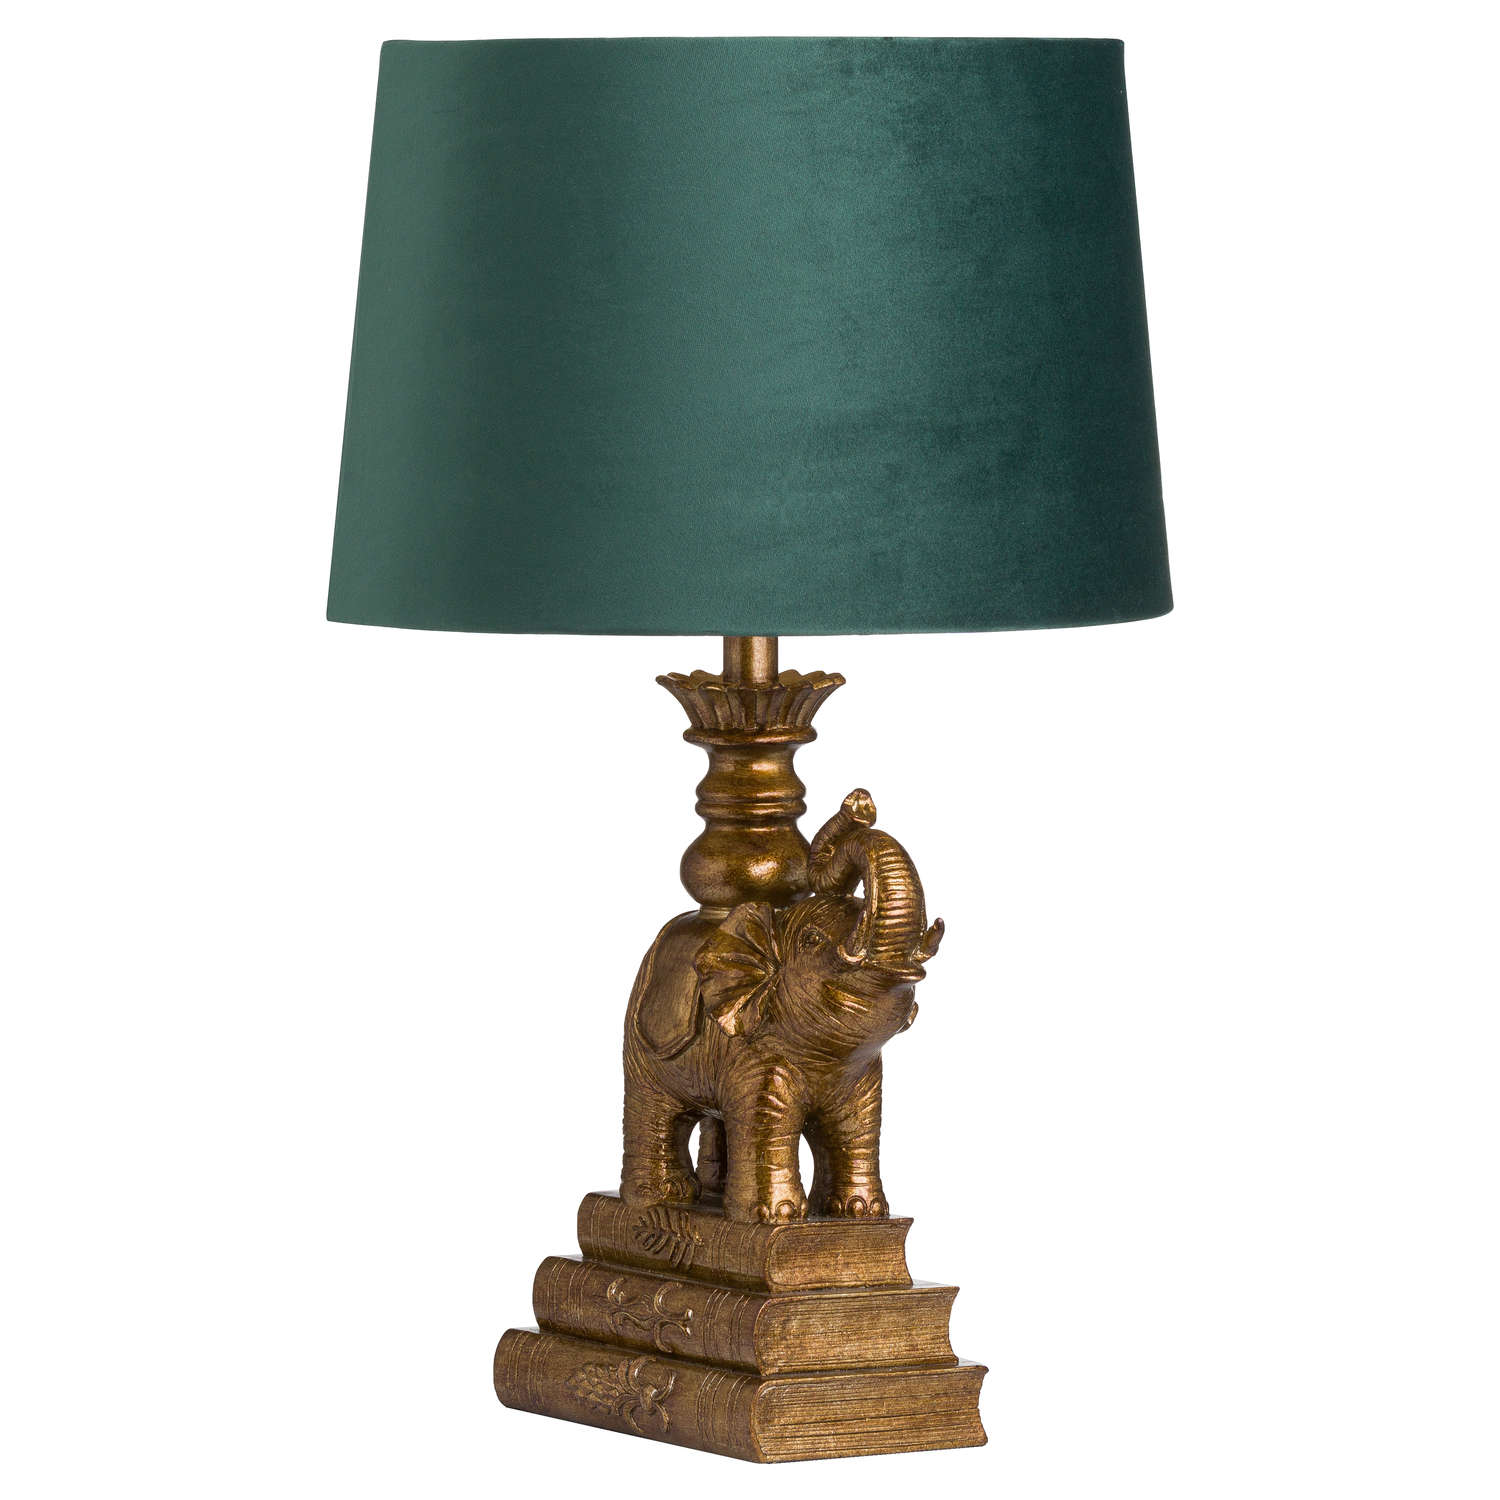 Antique Gold Elephant Table Lamp With Emerald Green Shade - Image 1